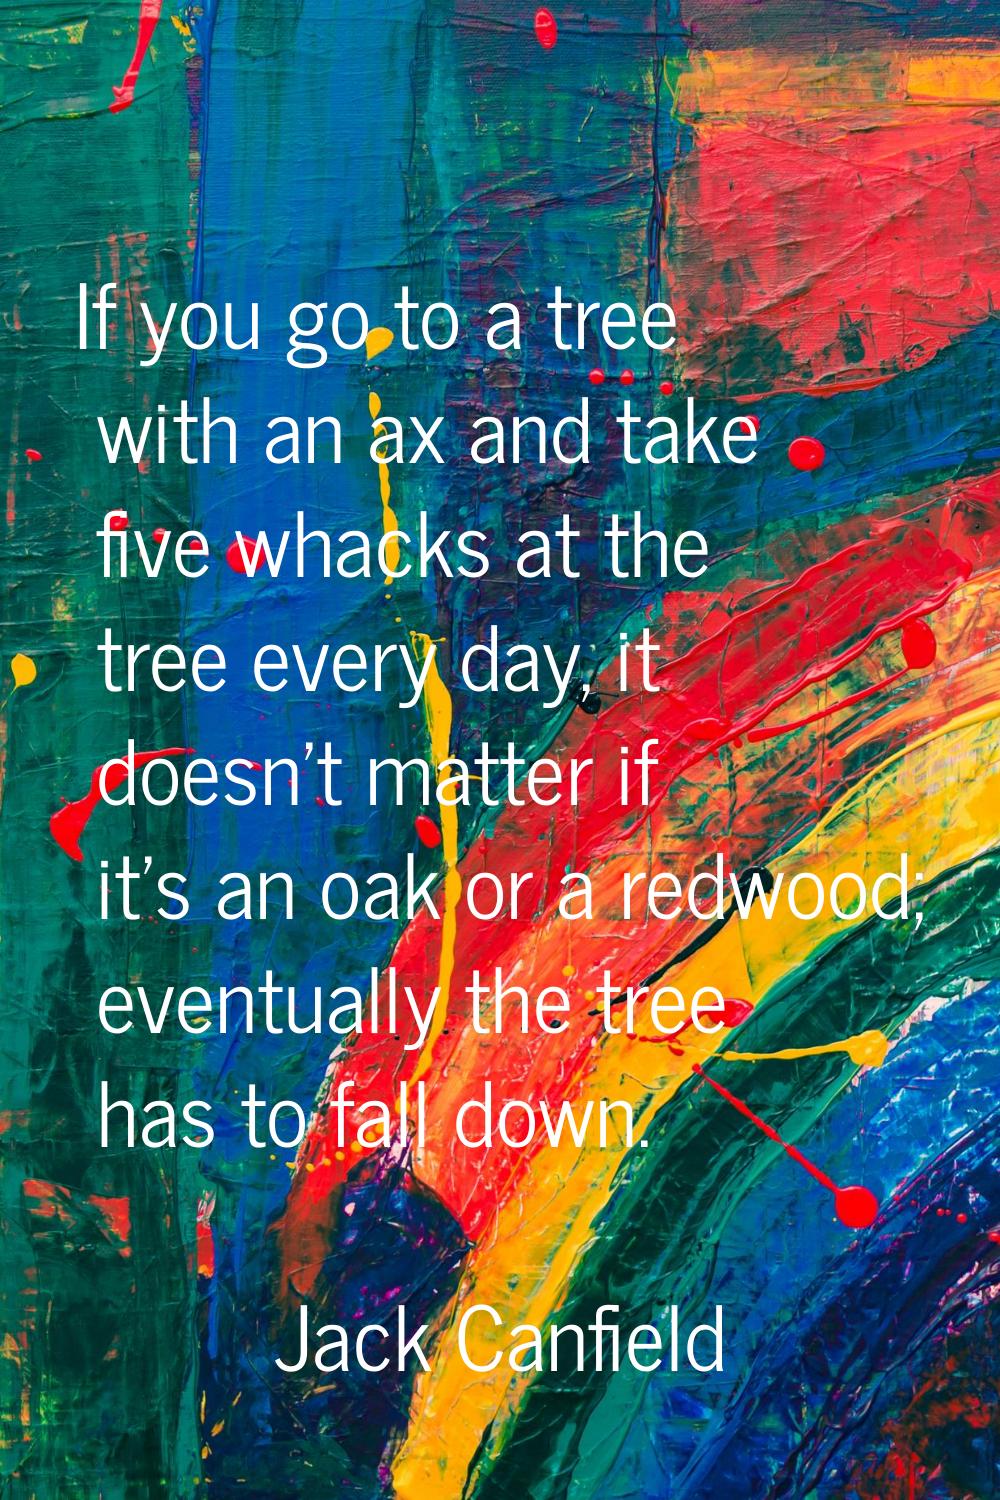 If you go to a tree with an ax and take five whacks at the tree every day, it doesn't matter if it'